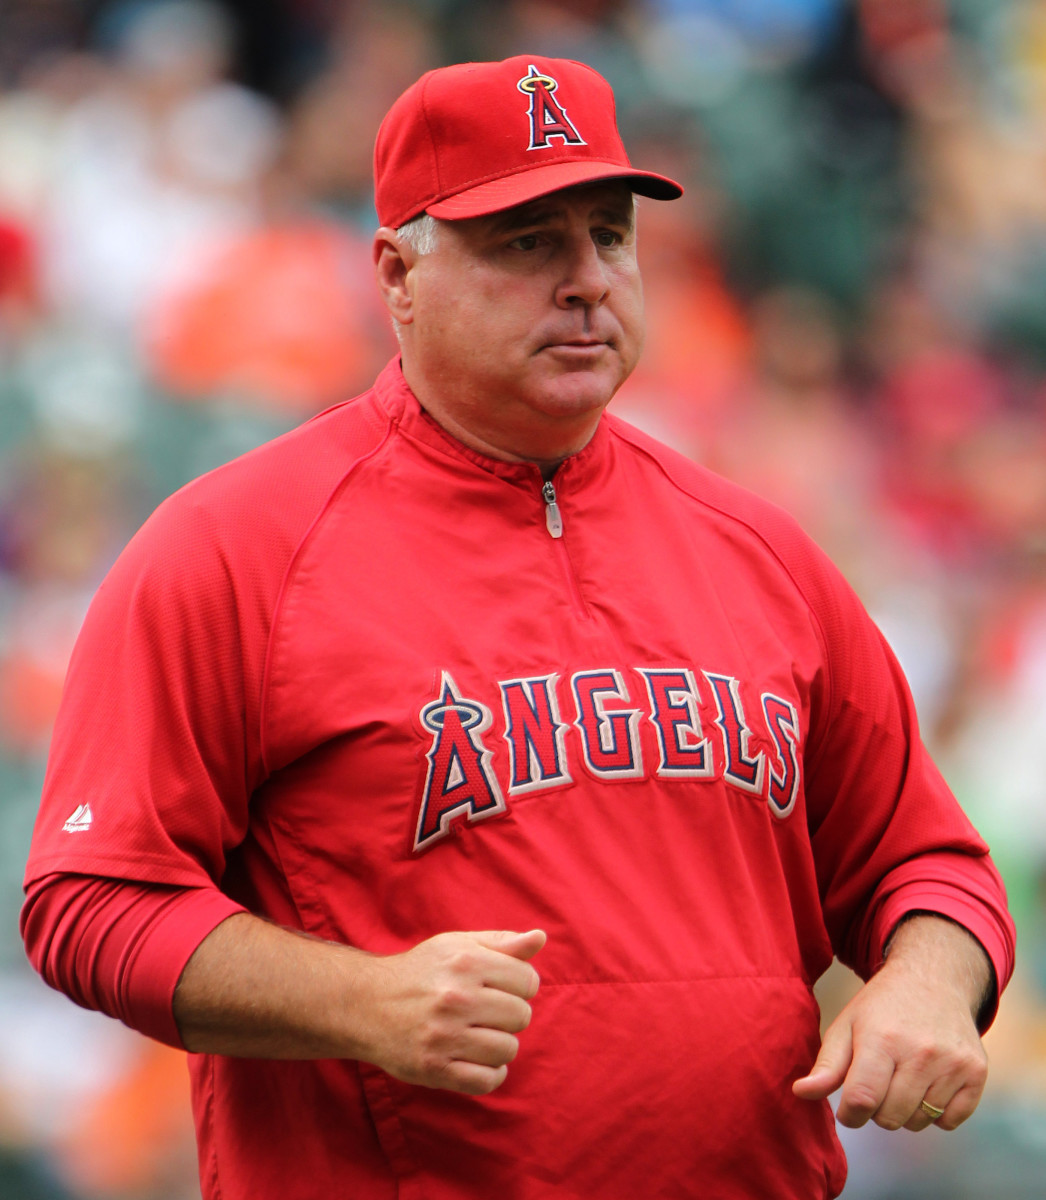 Mike Scioscia managed the Angels for 19 seasons. He is by far the longest-tenured manager in franchise history and got his start in 2000.